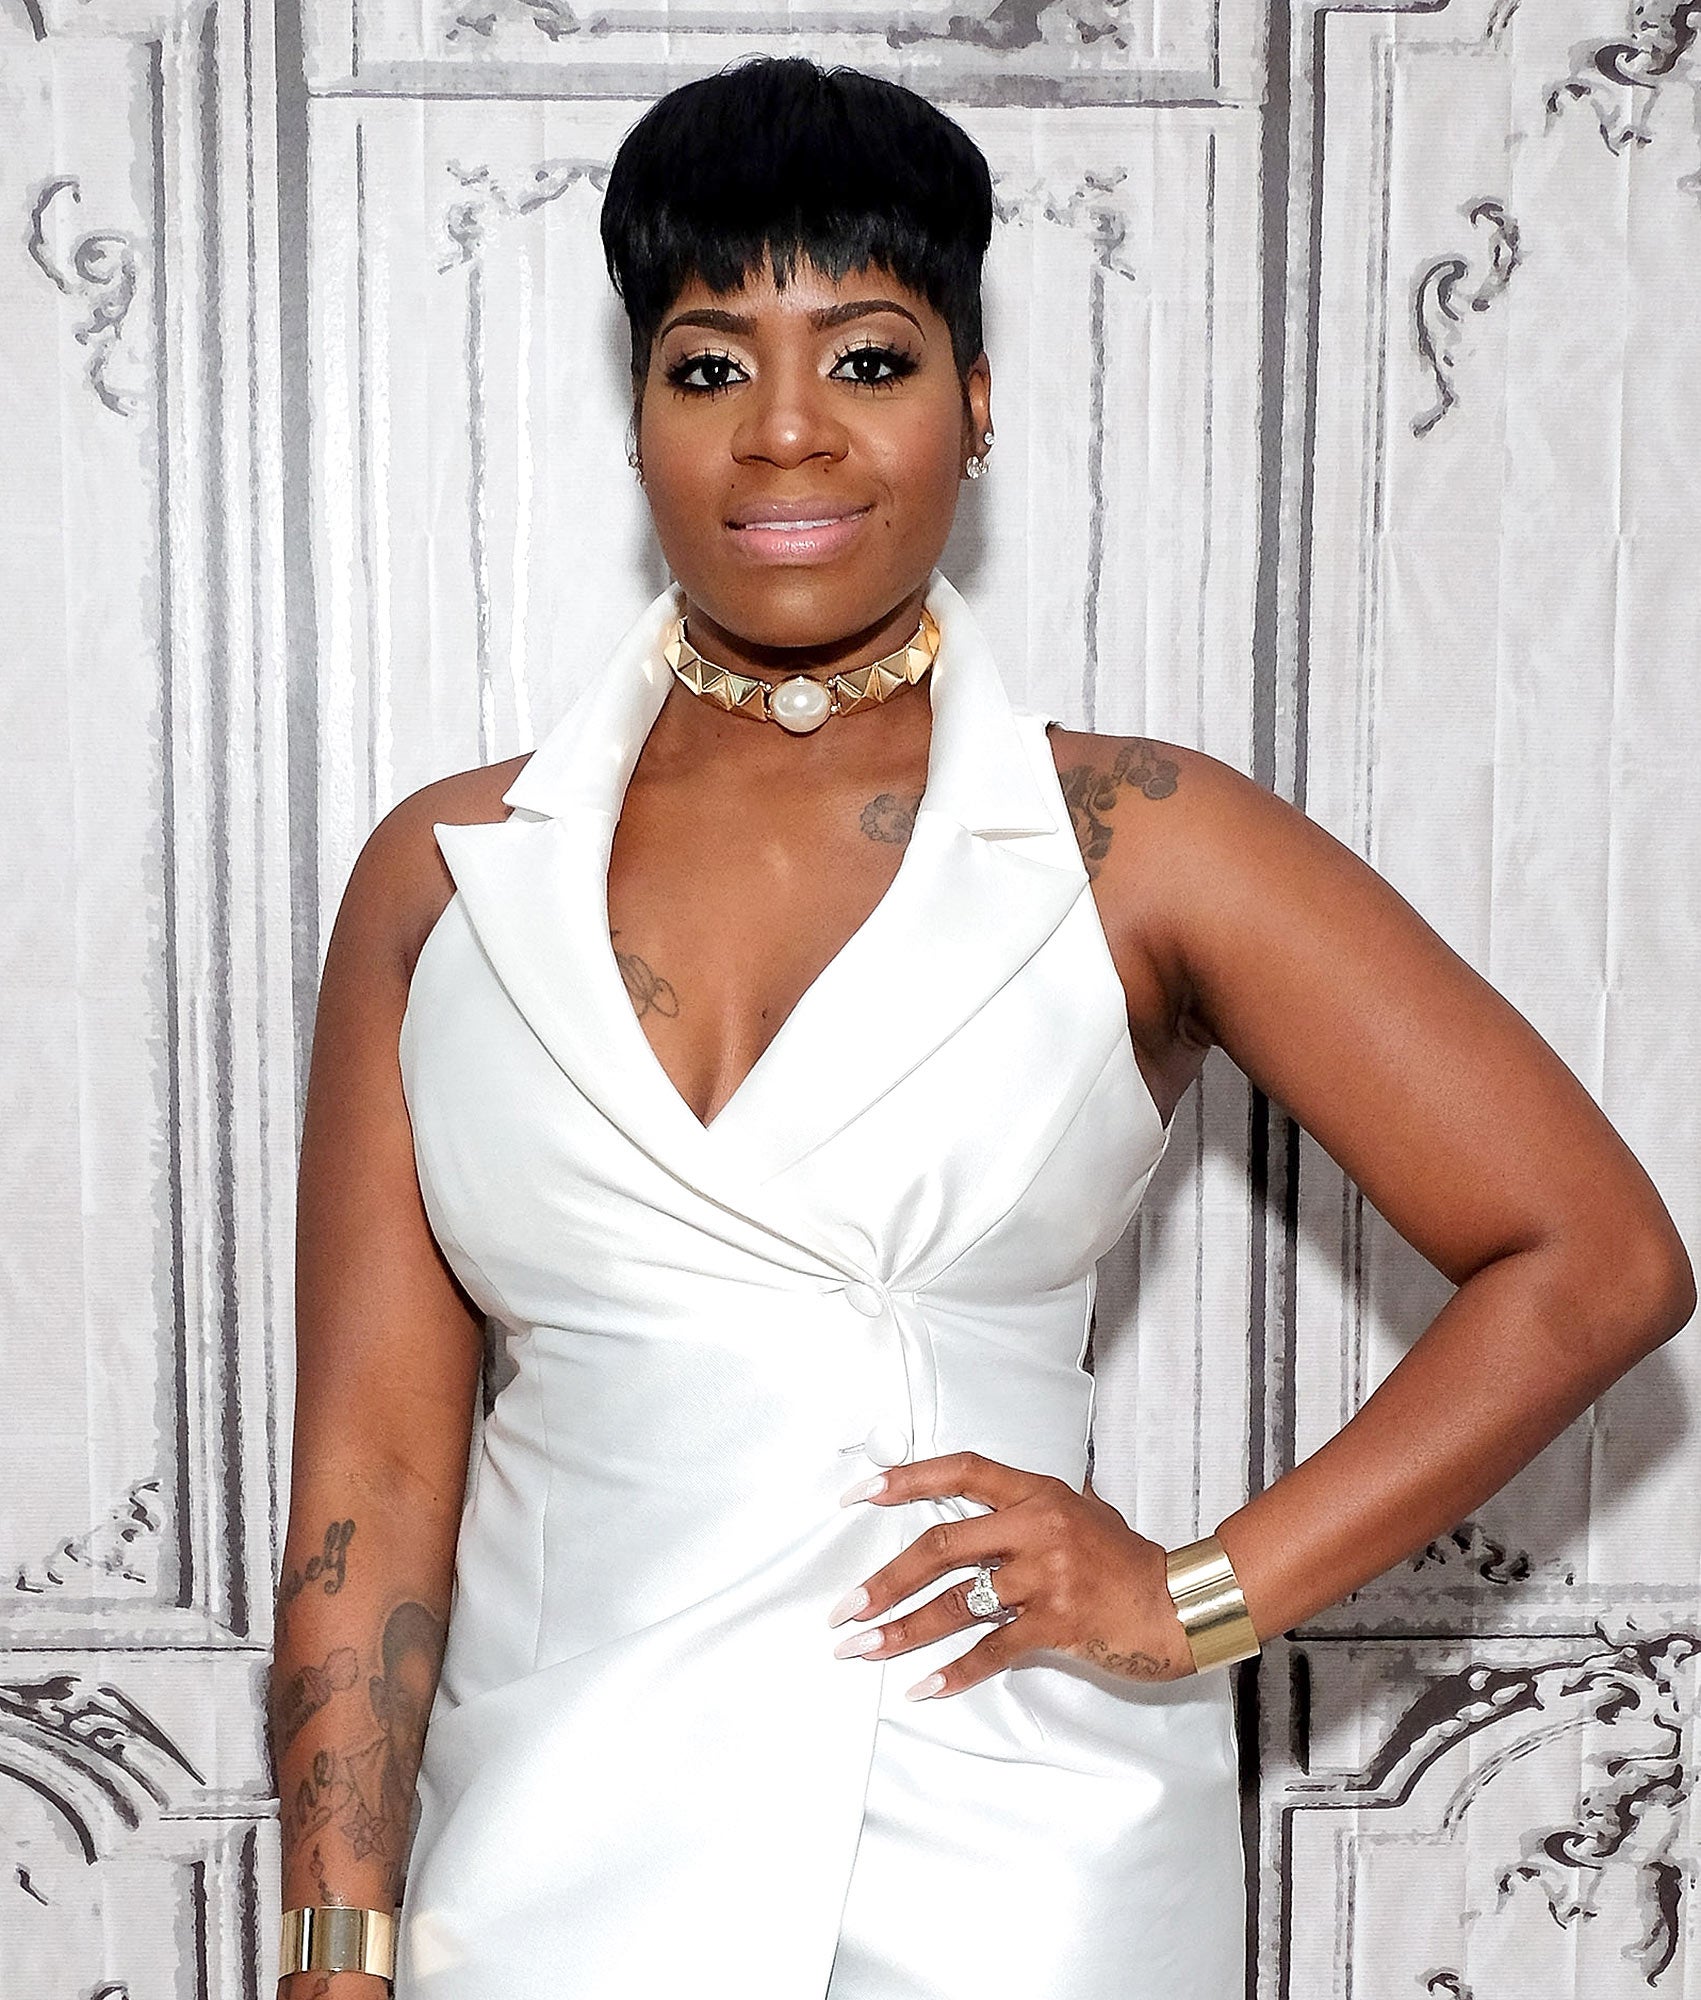 Fantasia 'Resting Comfortably' After Suffering Second-Degree Burns on Her Arm
